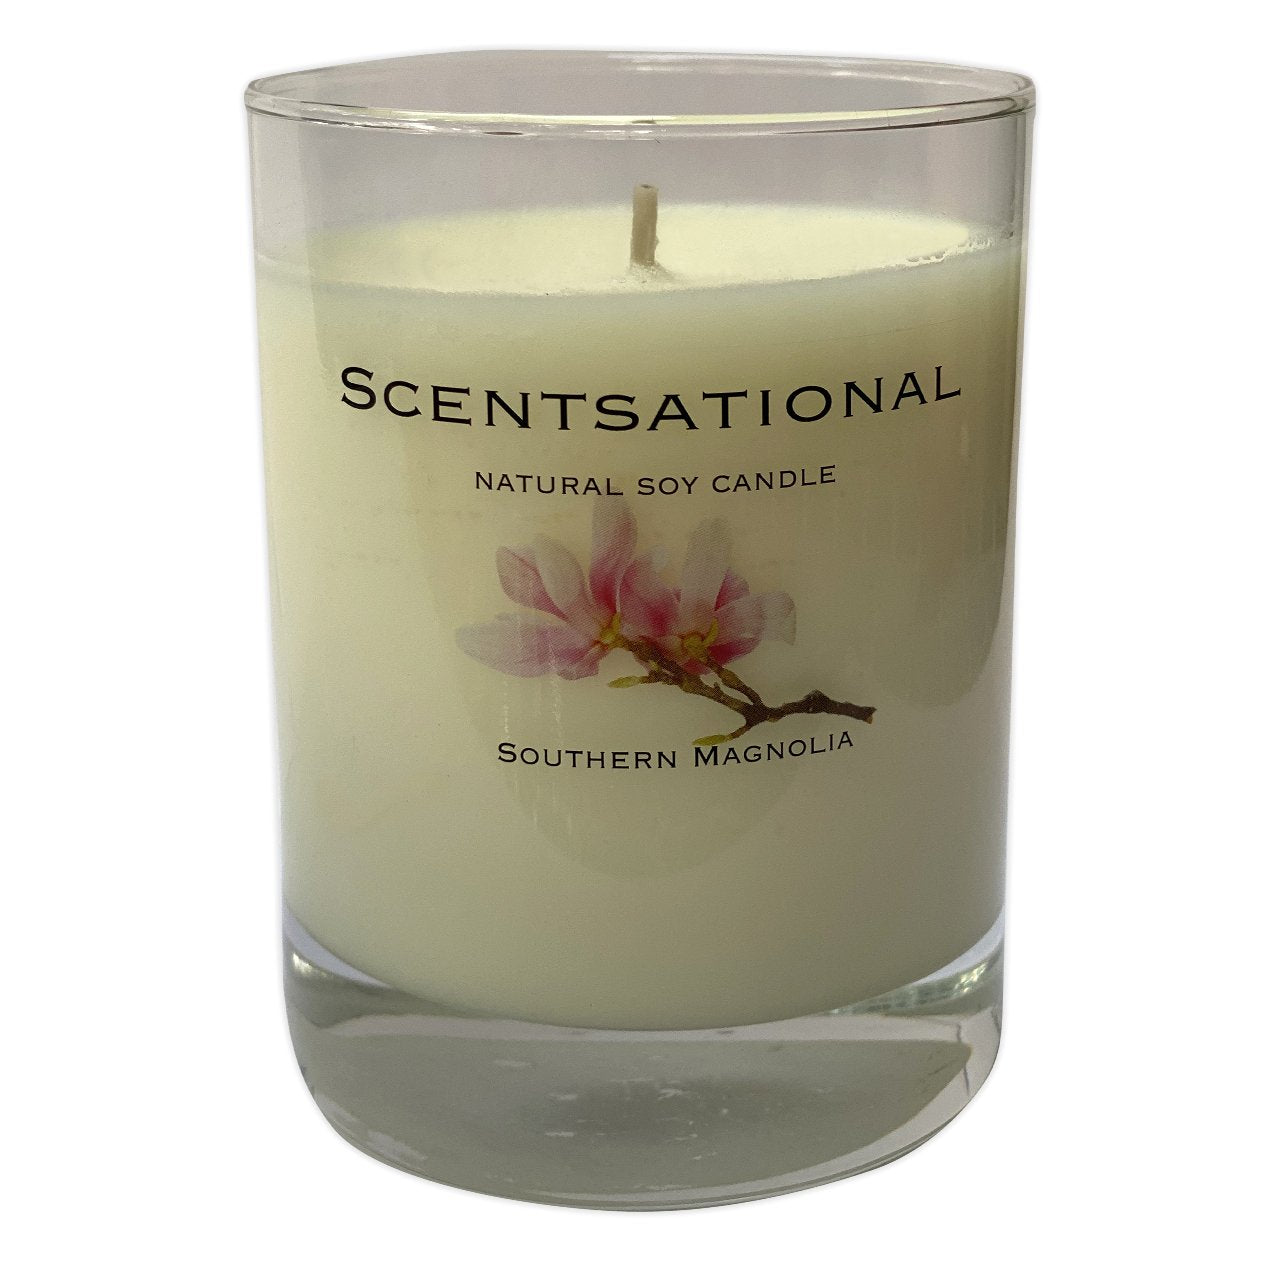 Scented Soy Candles SOUTHERN MAGNOLIA (11 oz) eliminates smoke, household and pet odors.